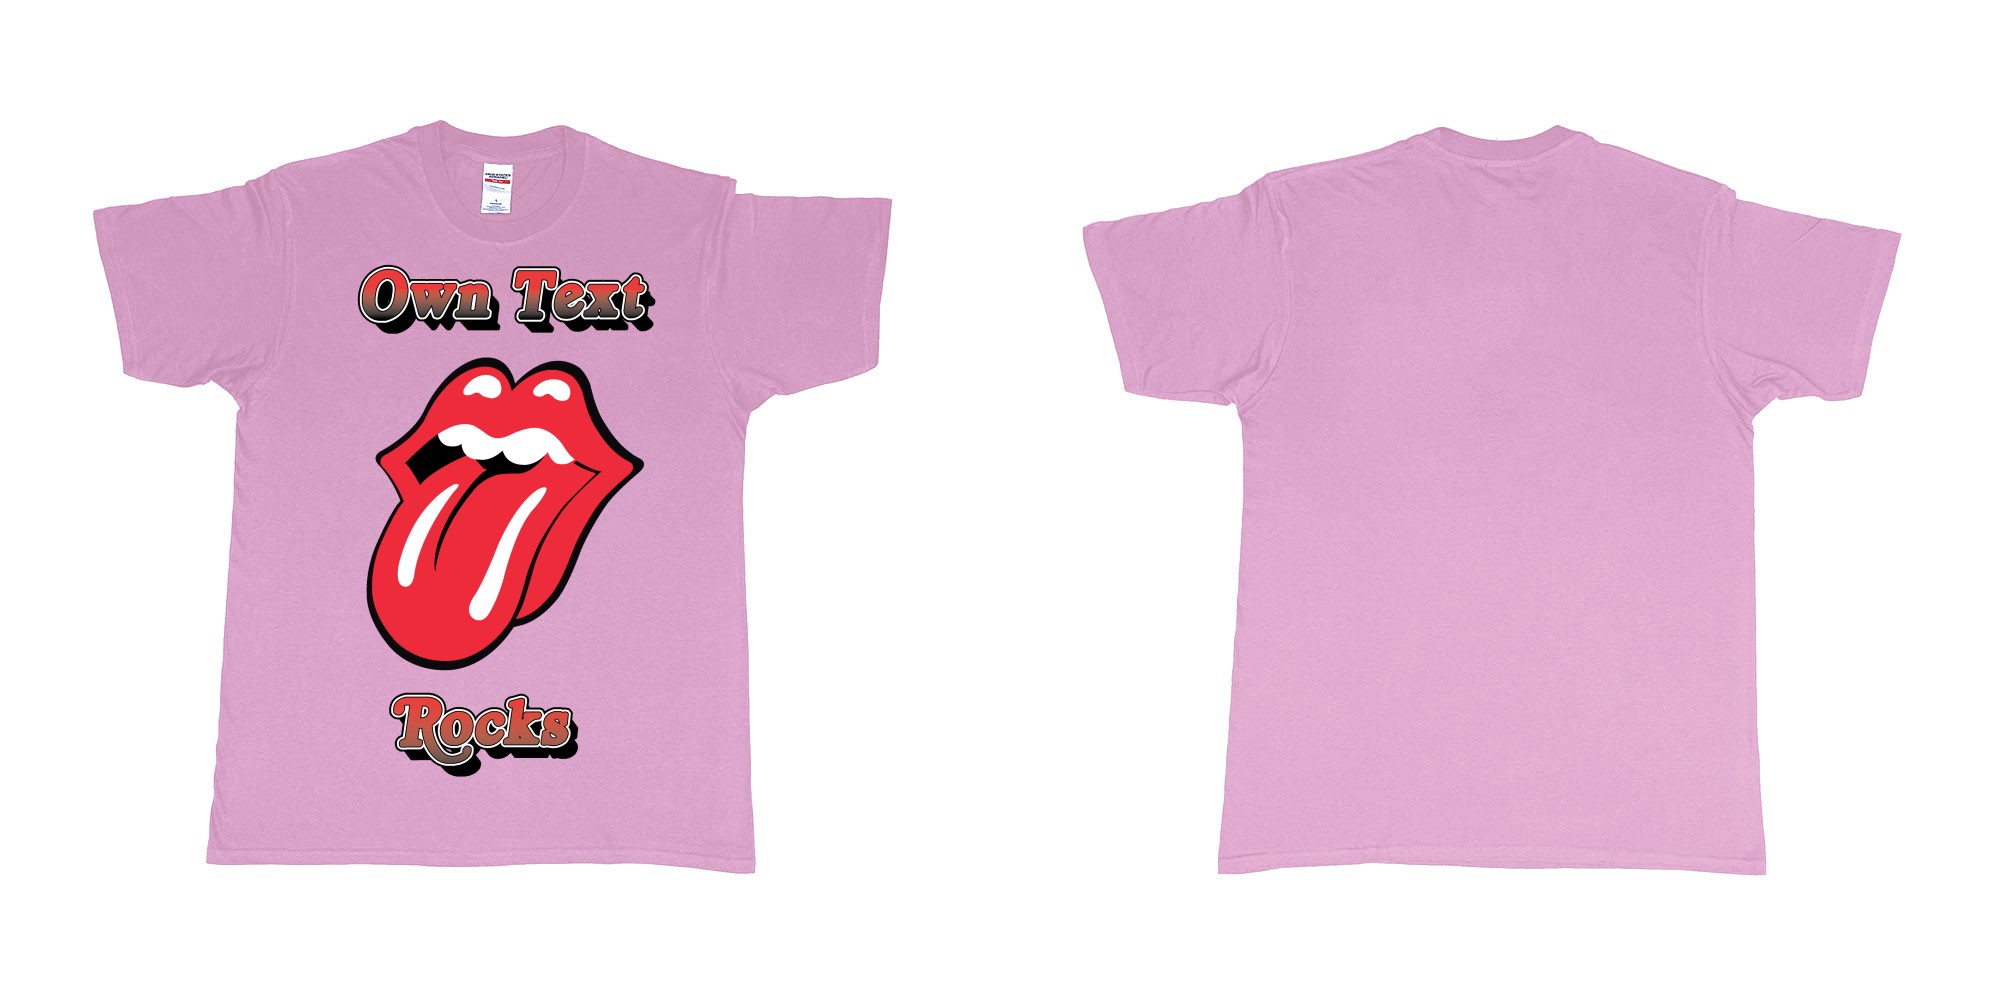 Custom tshirt design own custom text rocks rolling stones logo red tongue and lips print bali in fabric color light-pink choice your own text made in Bali by The Pirate Way